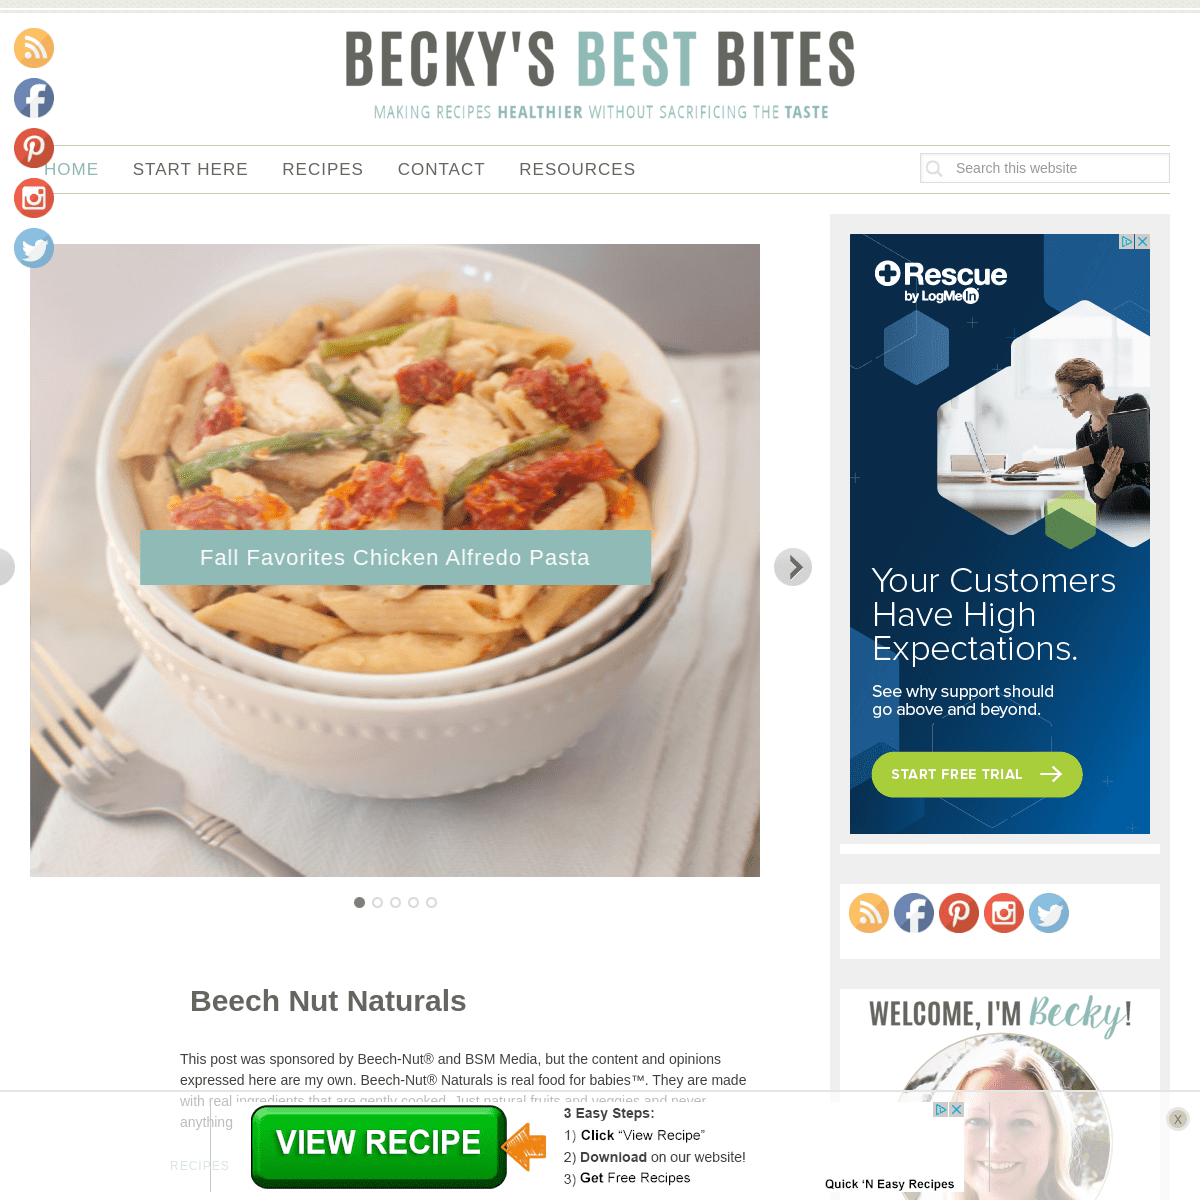 A complete backup of beckysbestbites.com